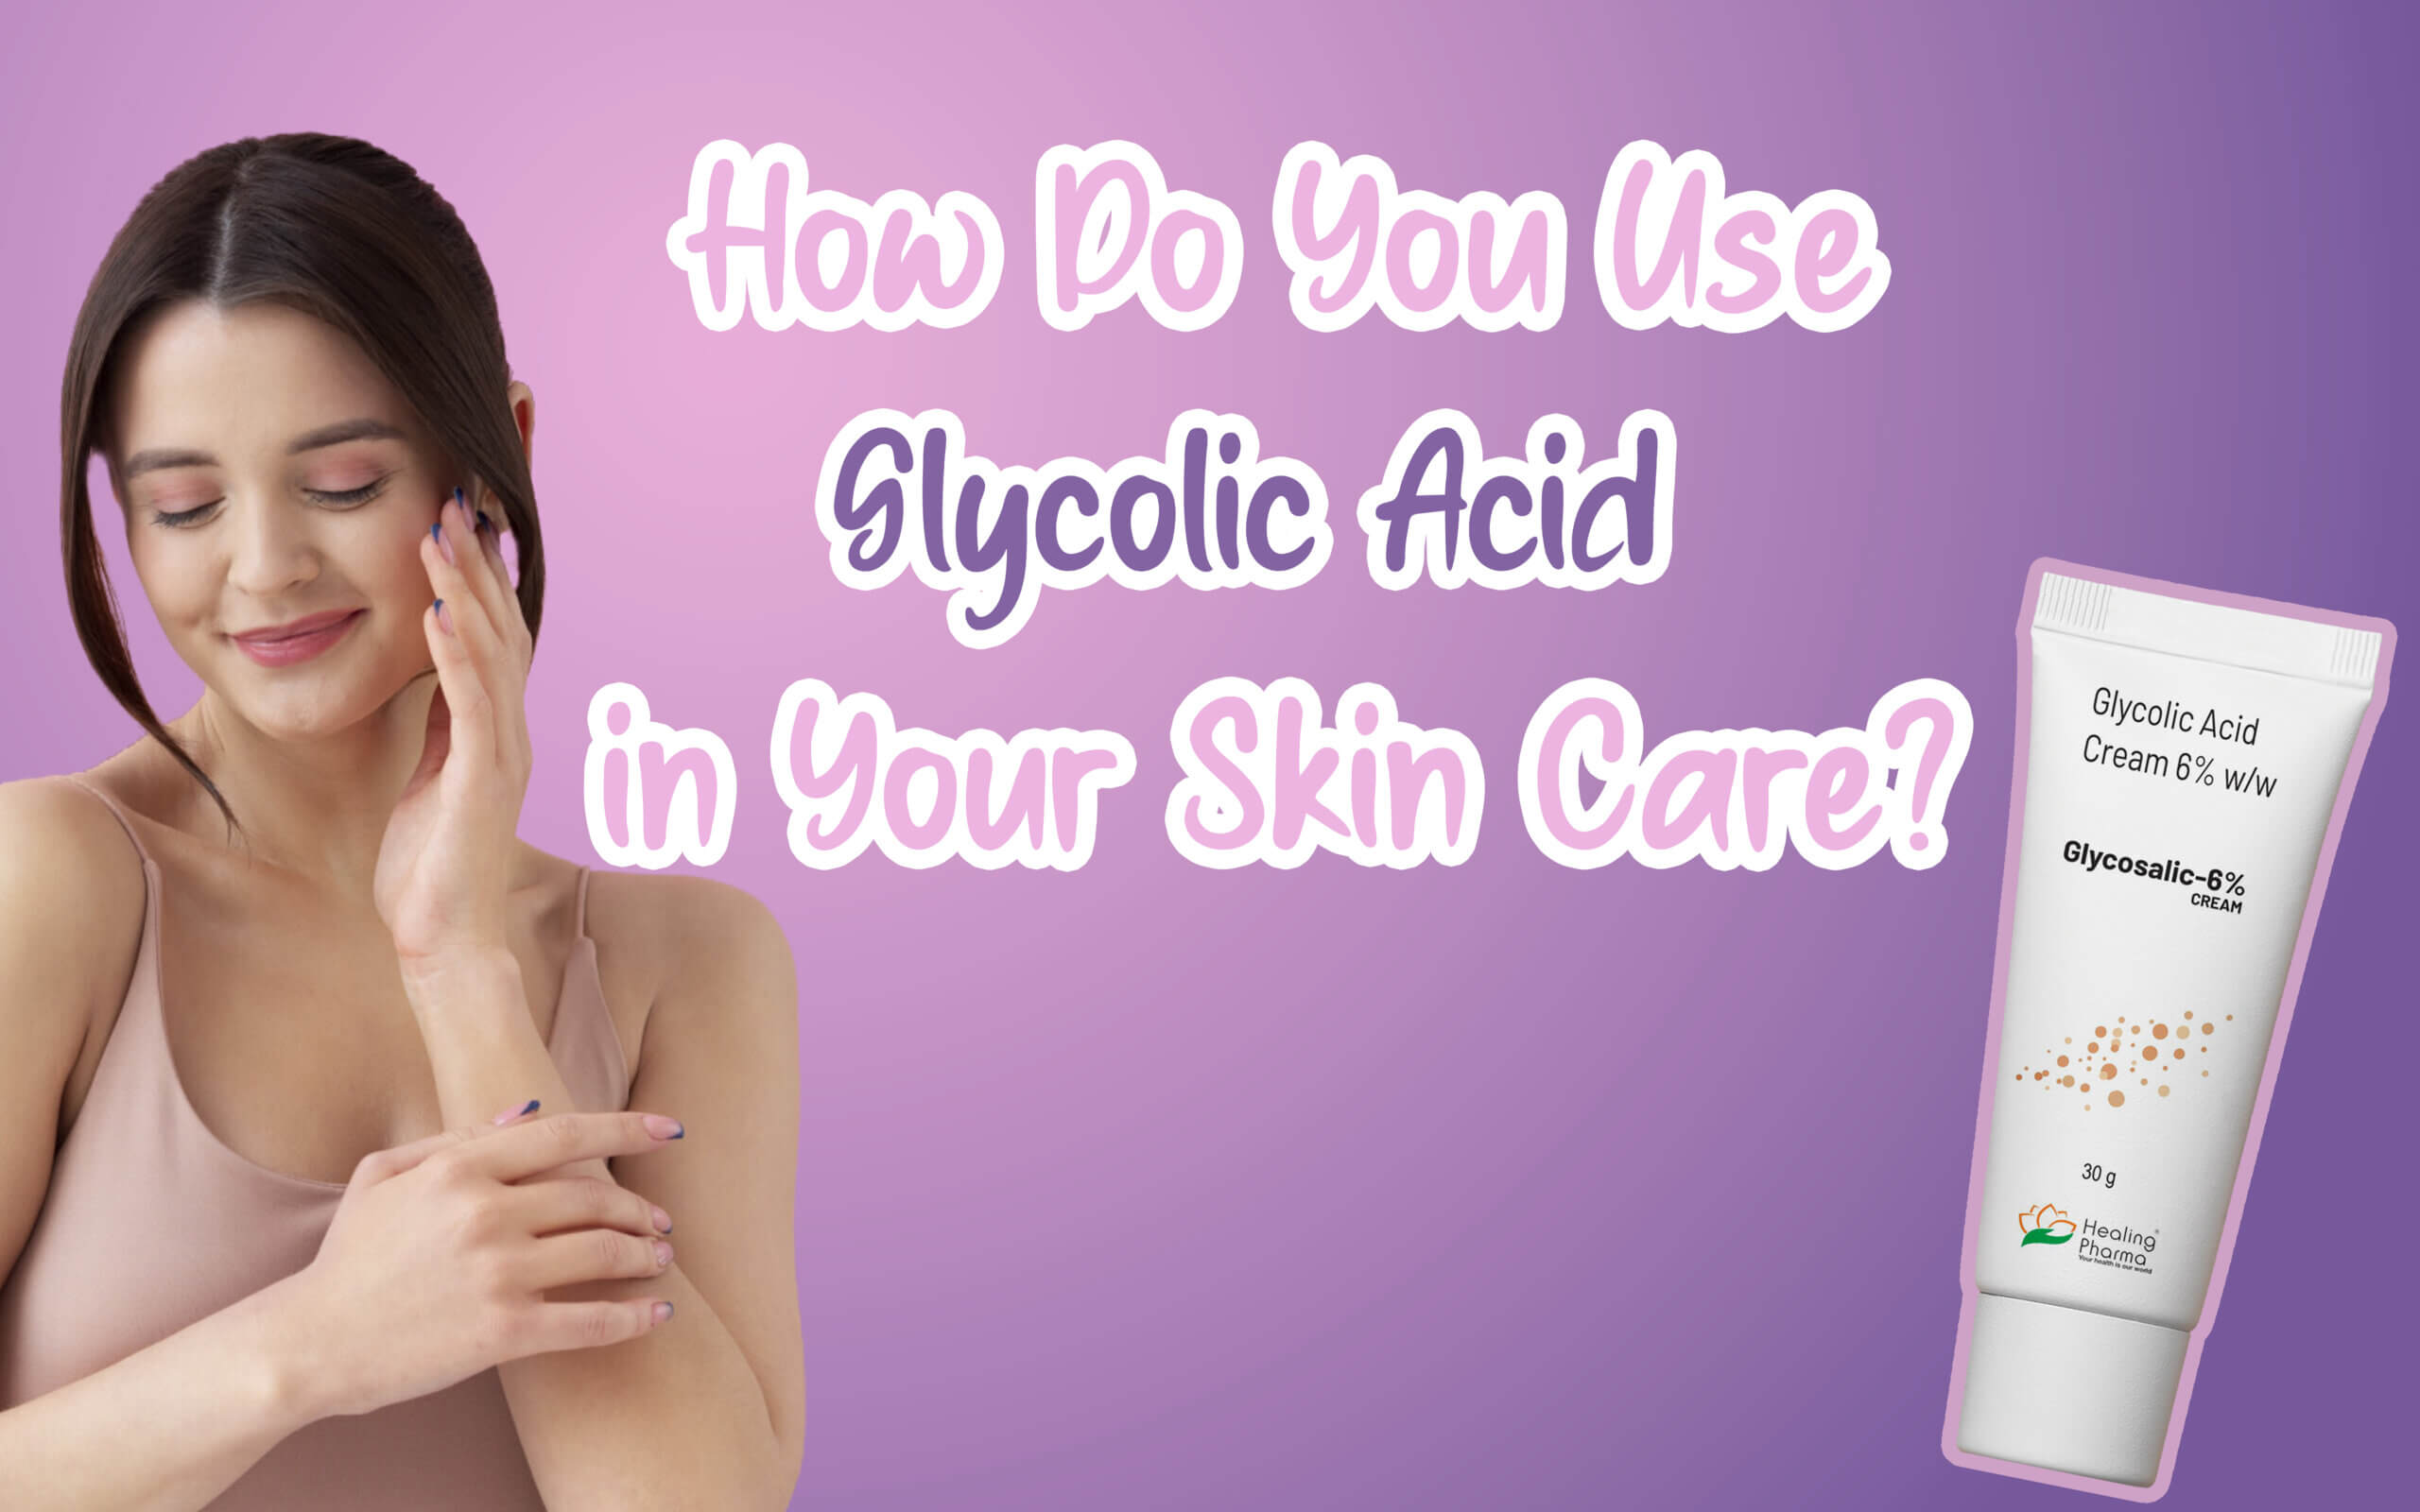 Glycolic Acid in Your Skin Care